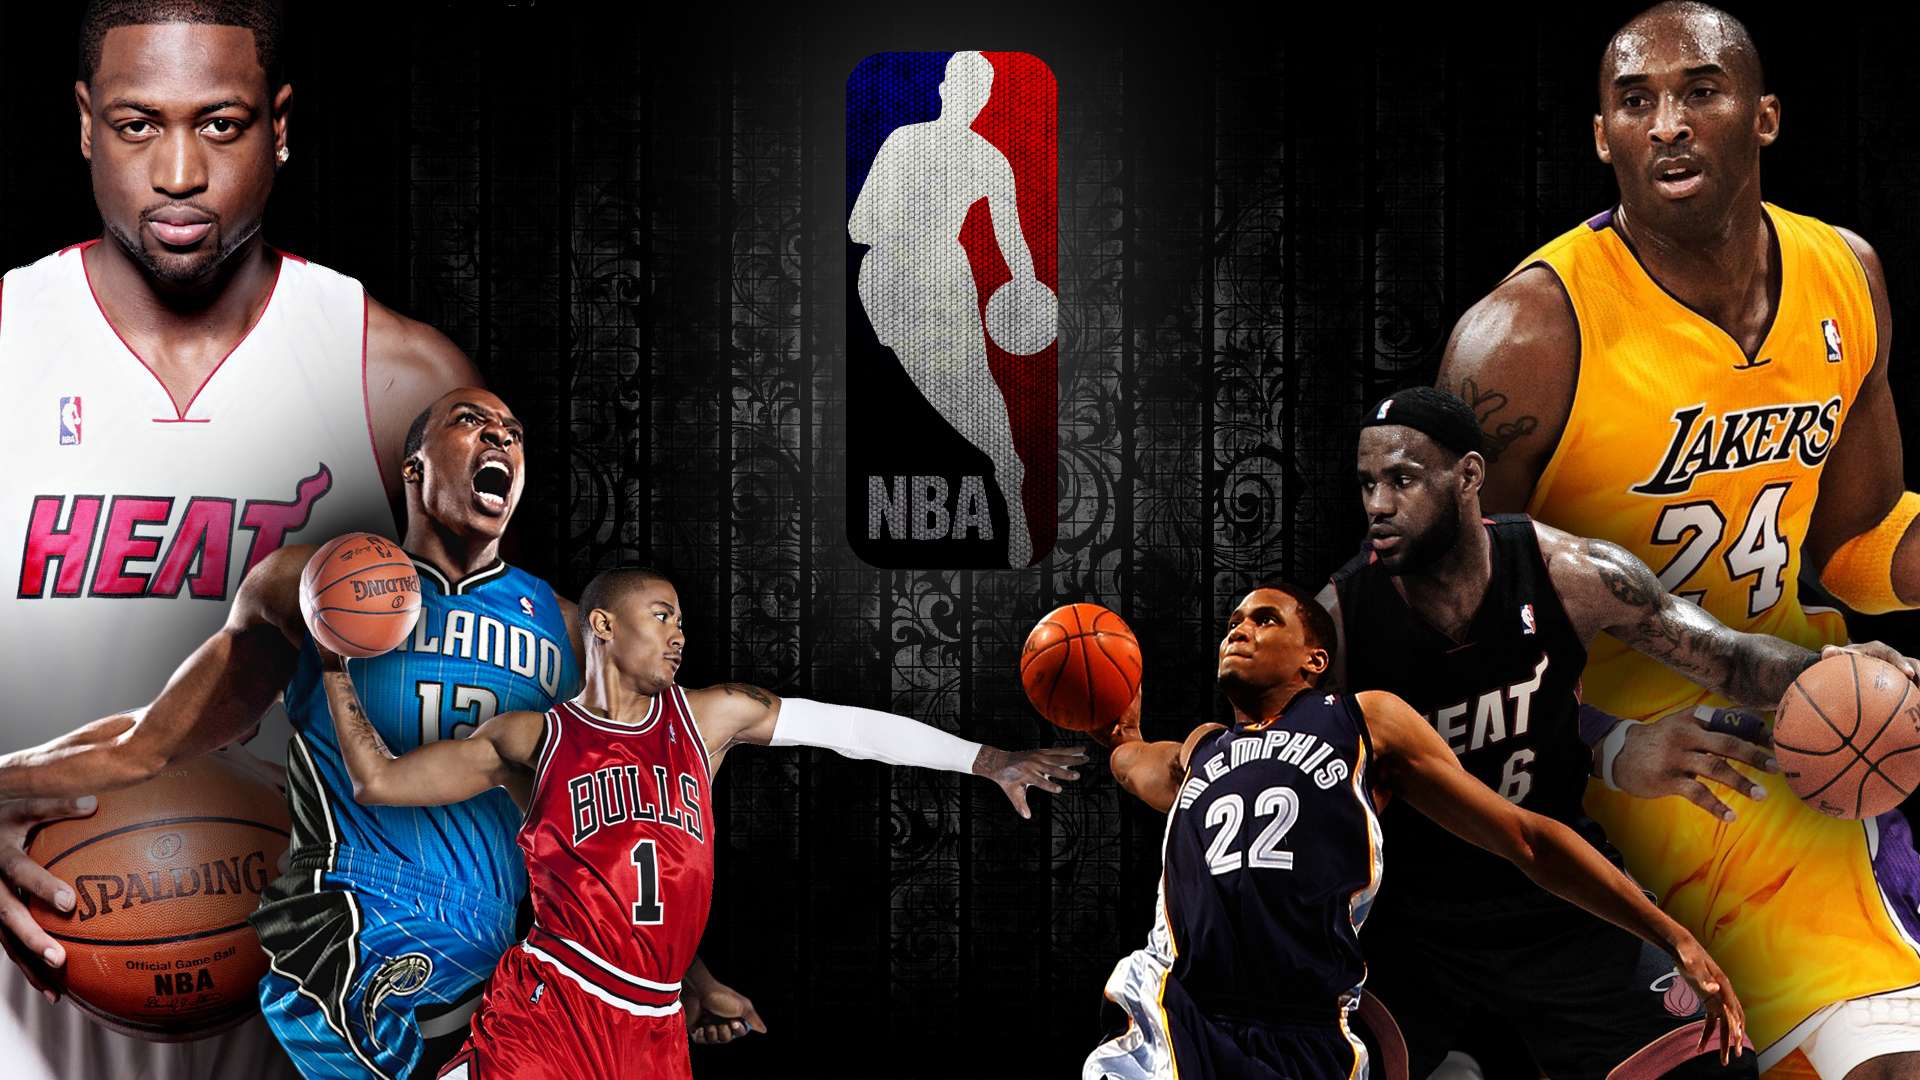 Nba Wallpaper HD Best Collection Of Sports